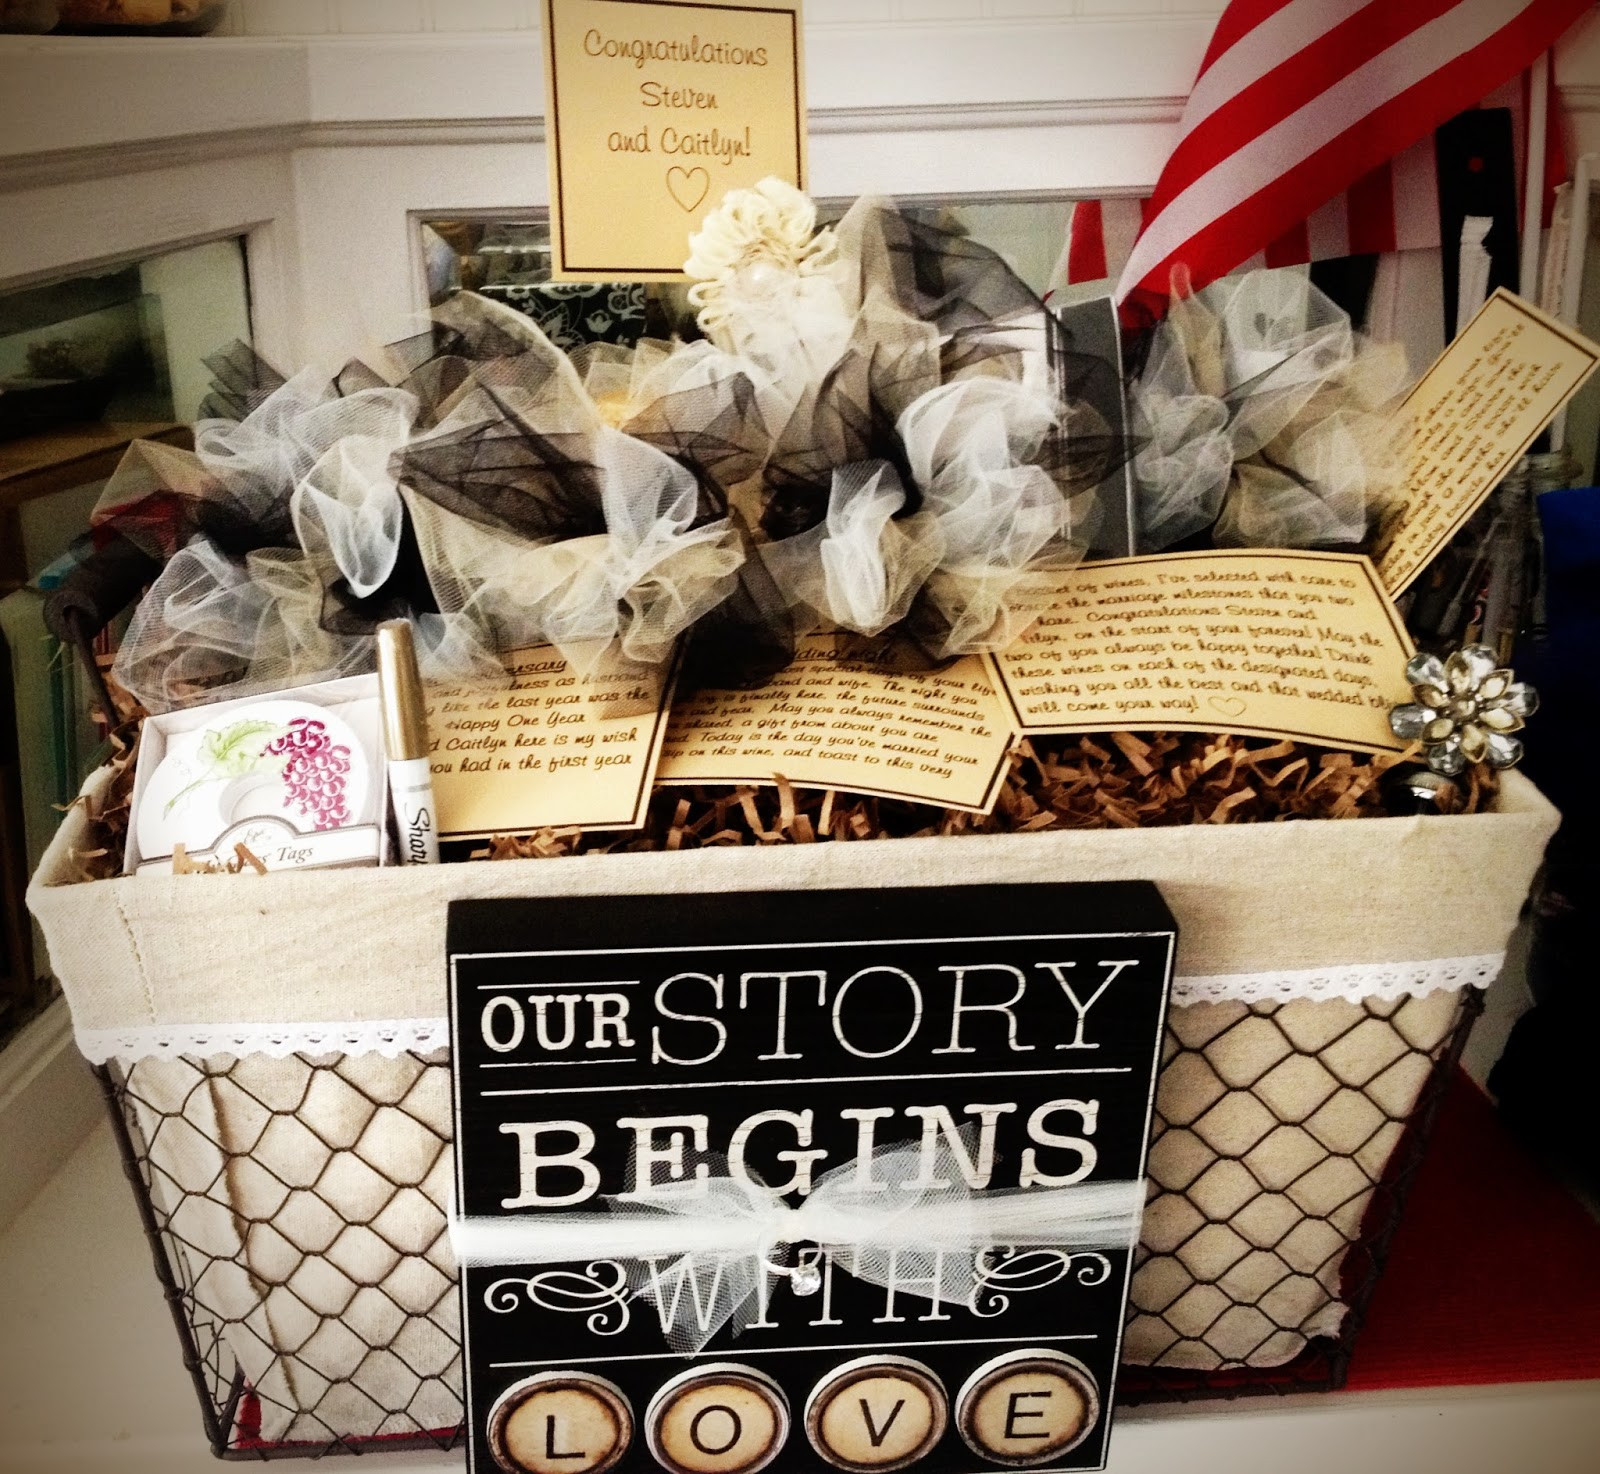 Cute Bridal Shower Gift Basket Ideas
 Brid te’s Pick of the Week – A Wine Basket of Firsts